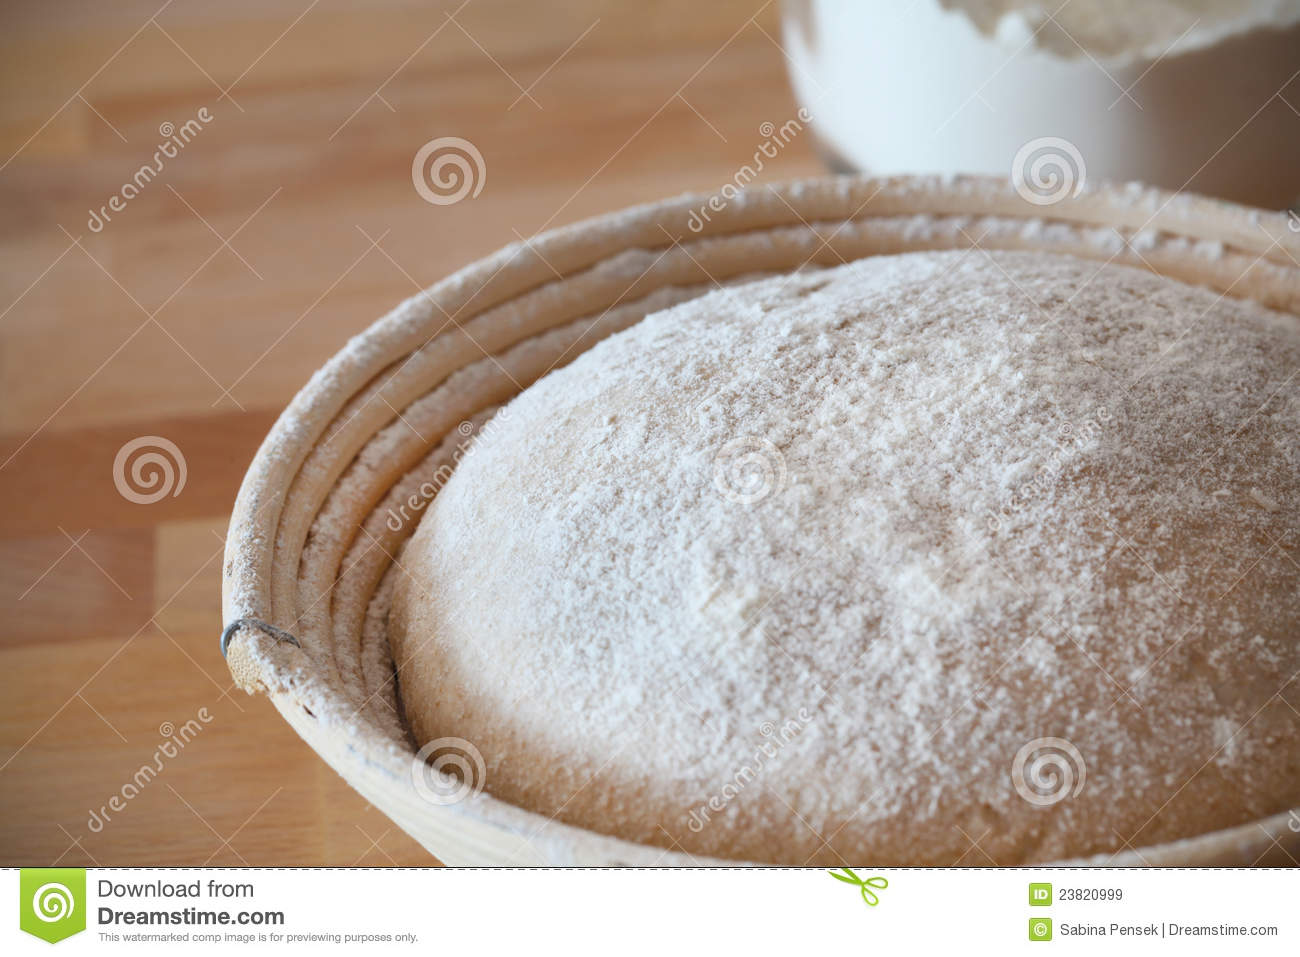 Whole Grain Dough Proofing In A Baneton Basket Royalty Free Stock